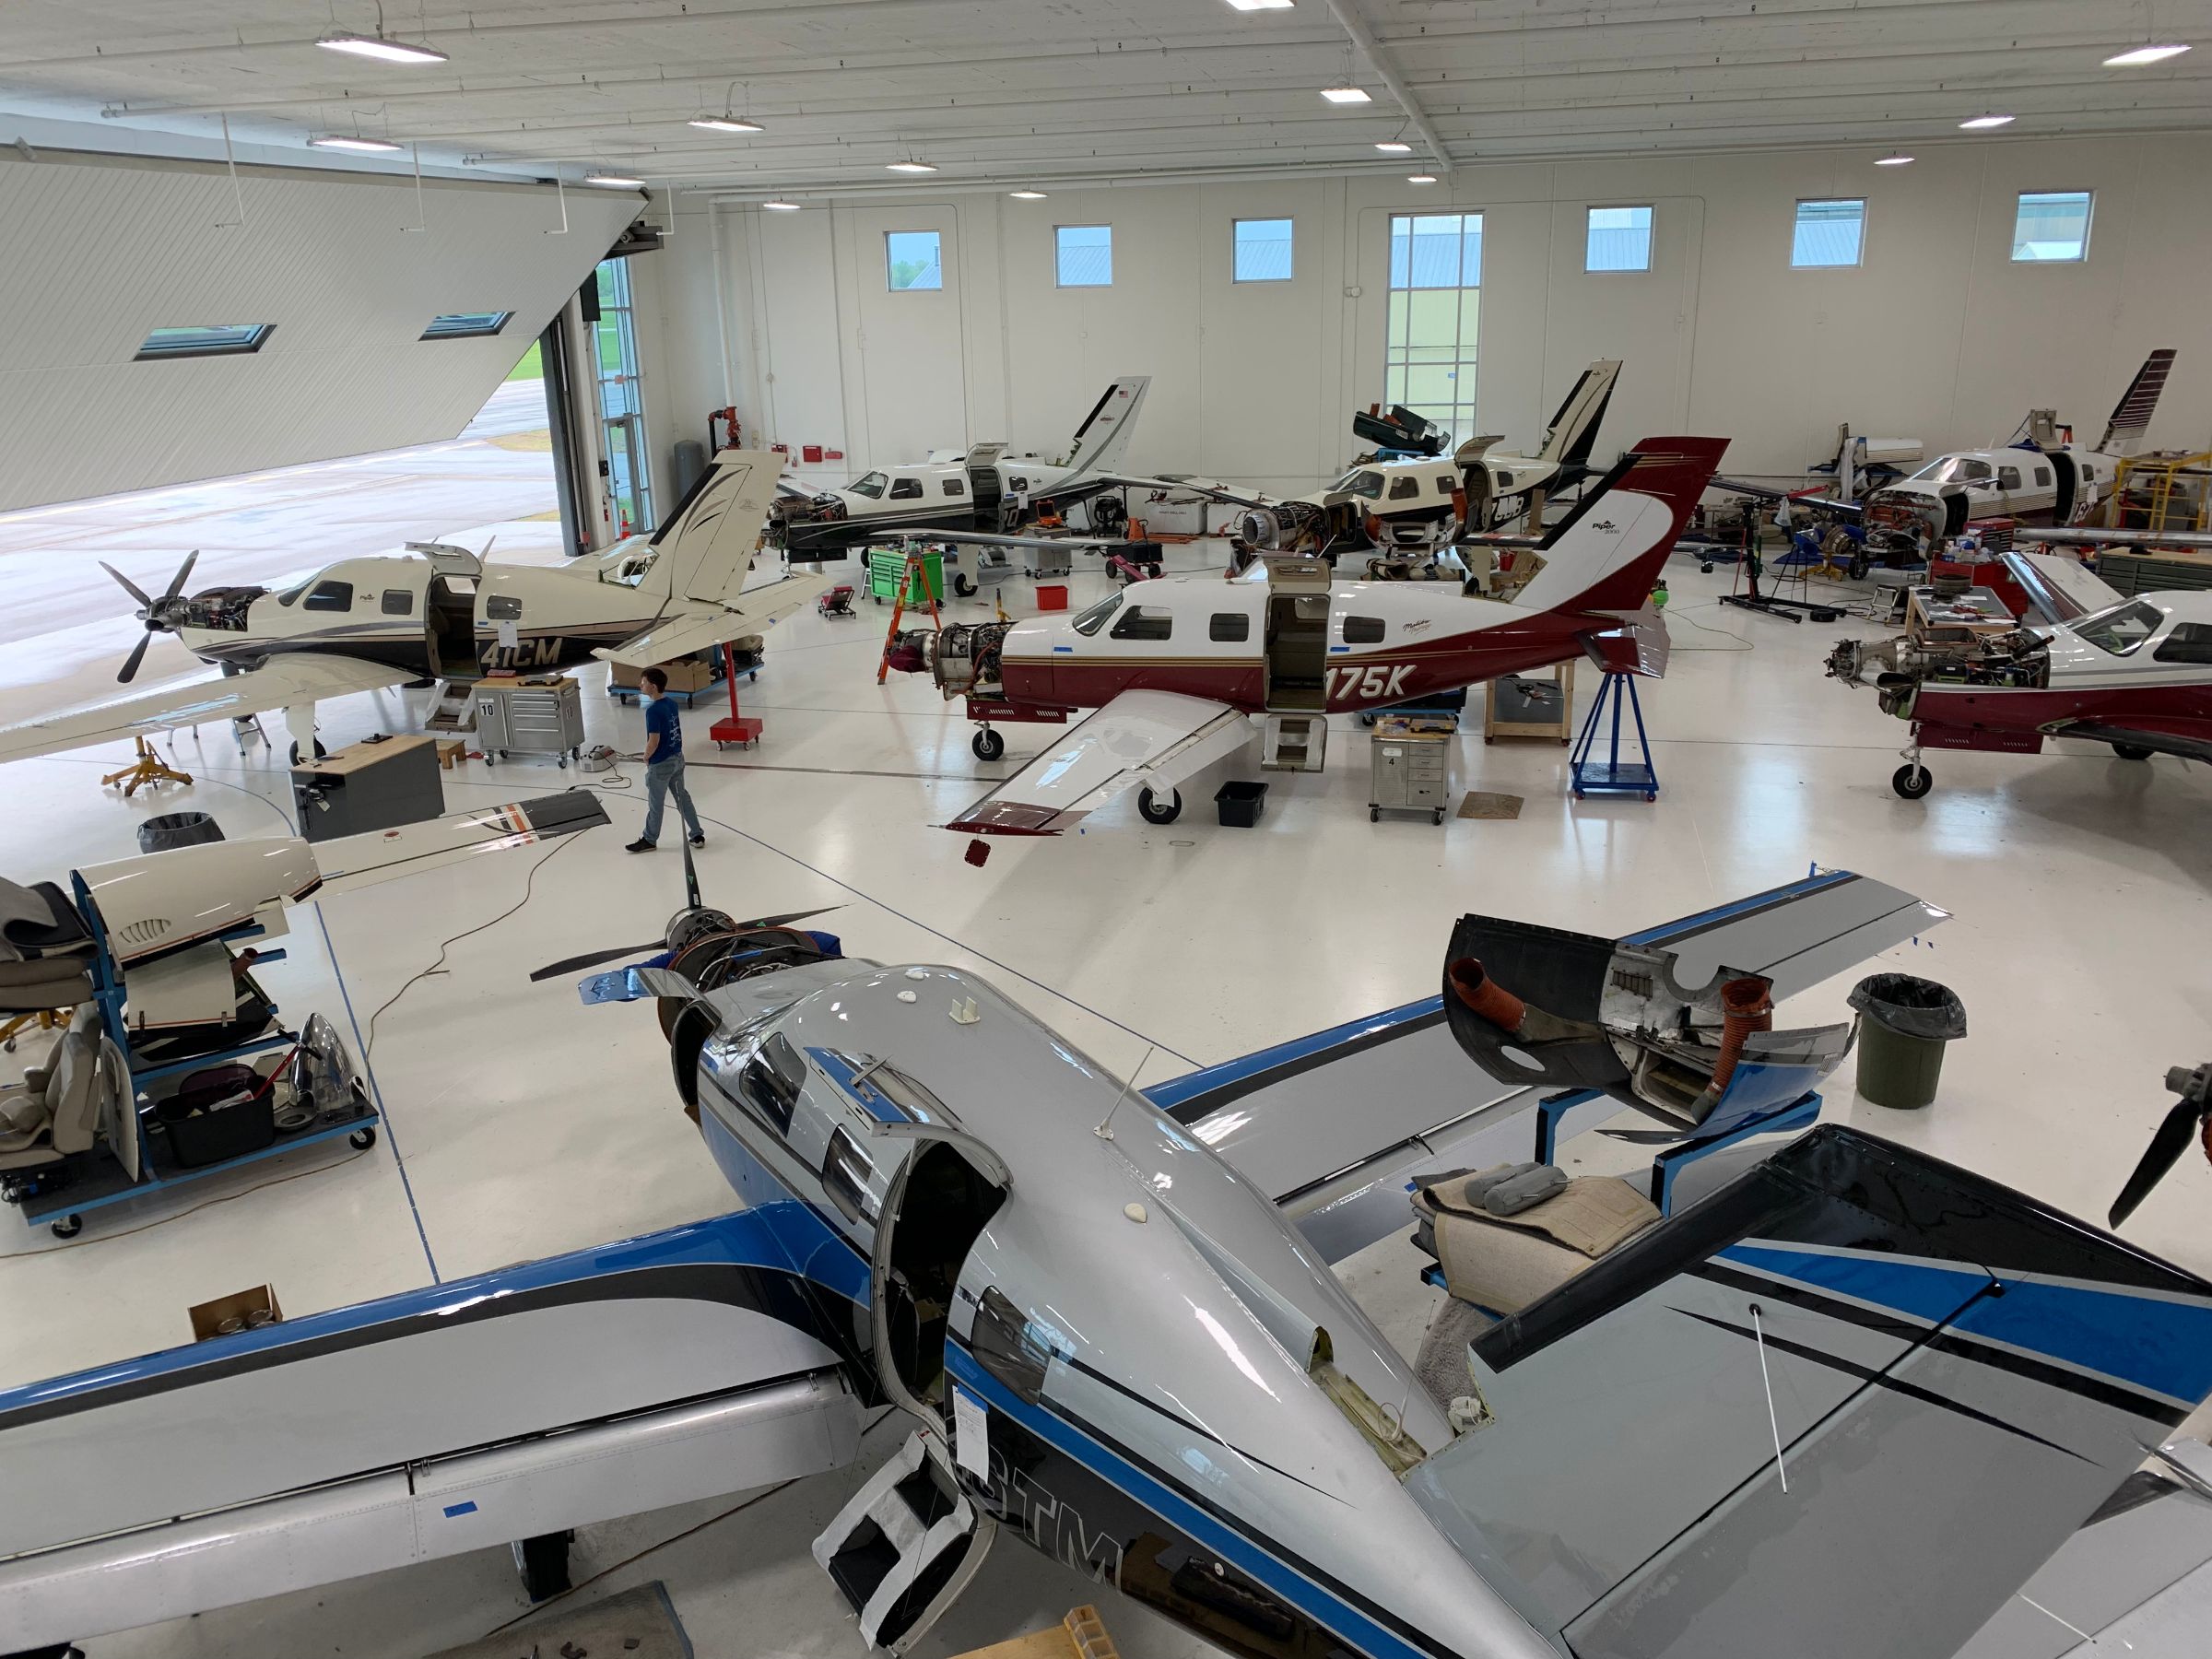 Aircraft maintenance garage with seven airplanes visible.